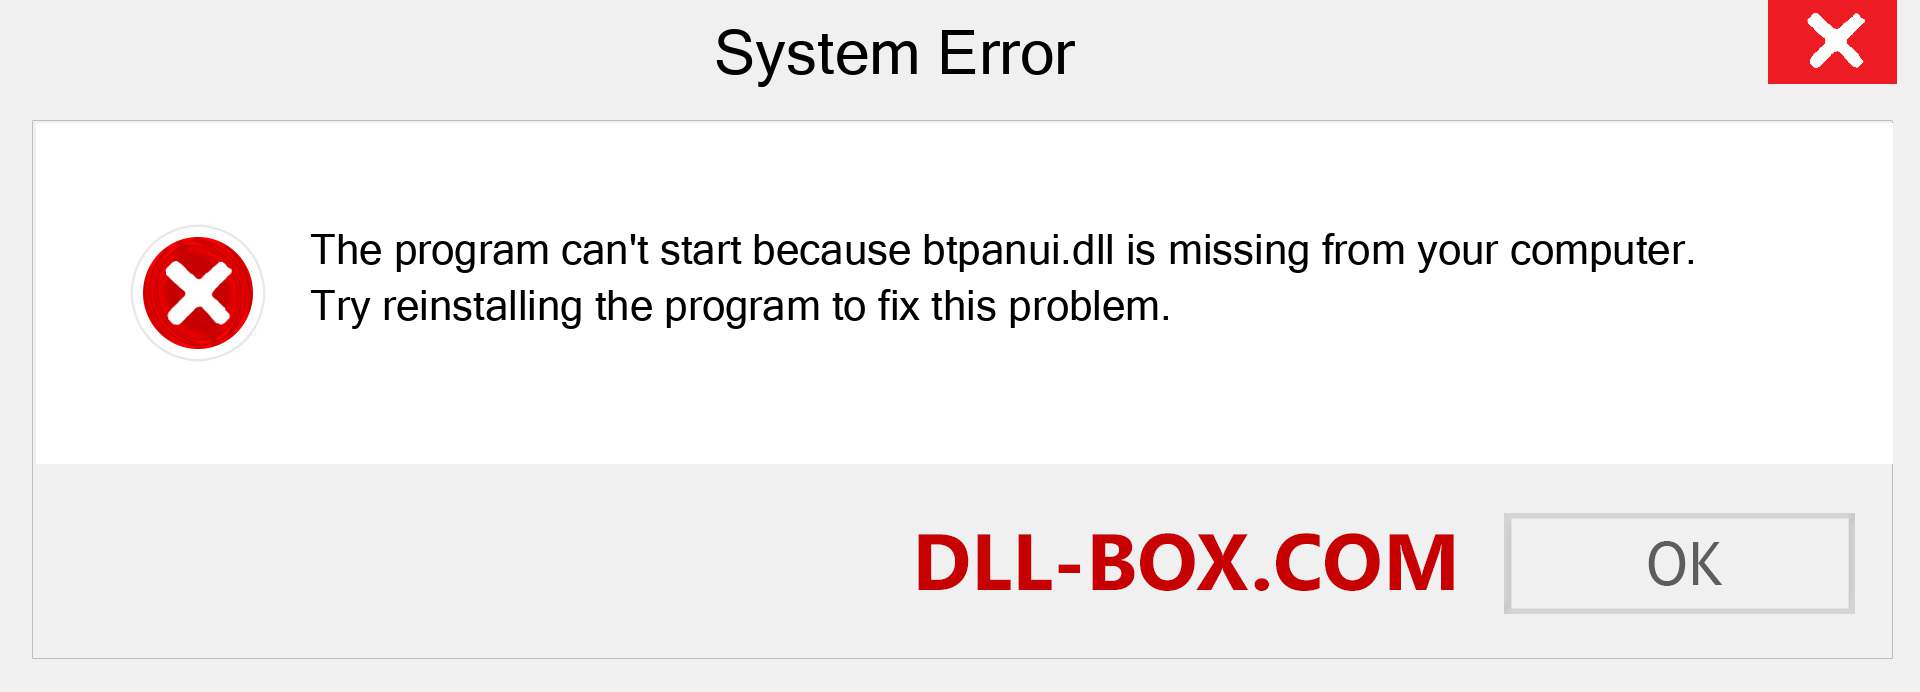  btpanui.dll file is missing?. Download for Windows 7, 8, 10 - Fix  btpanui dll Missing Error on Windows, photos, images